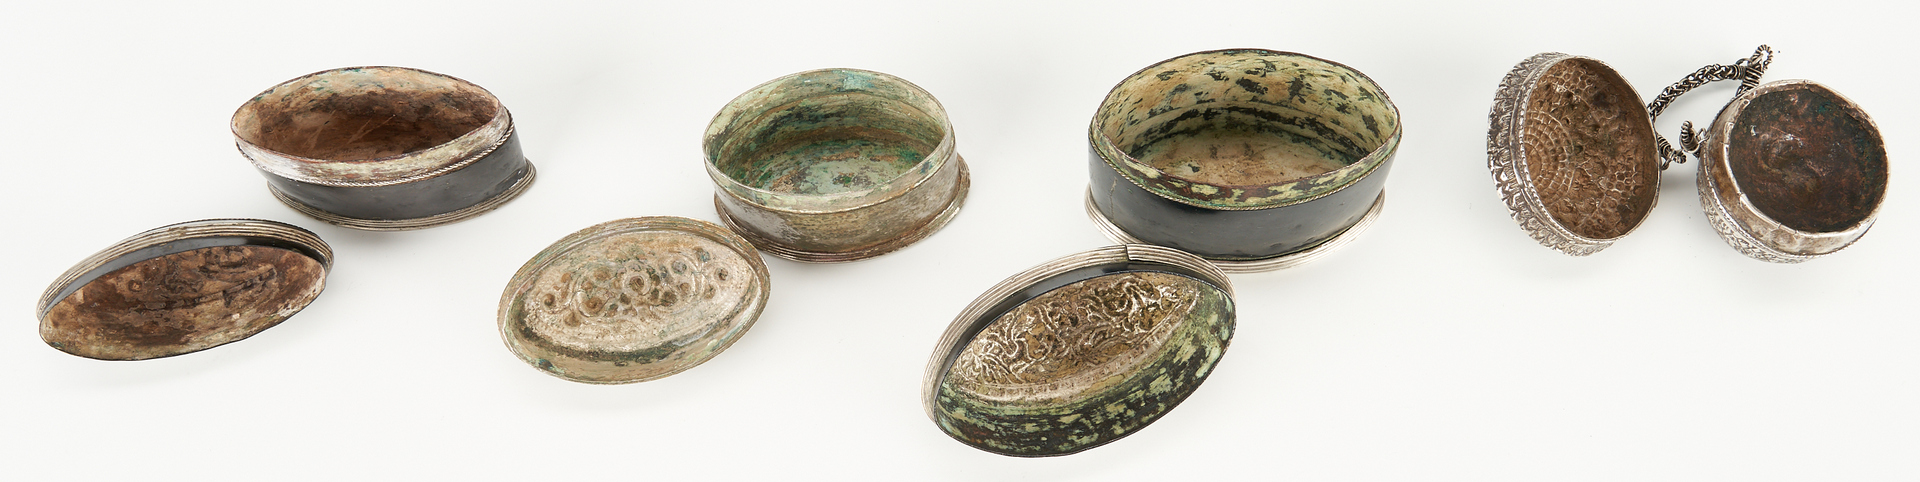 Lot 332: 5 Burmese Silver Items, incl. Anklet & Boxes